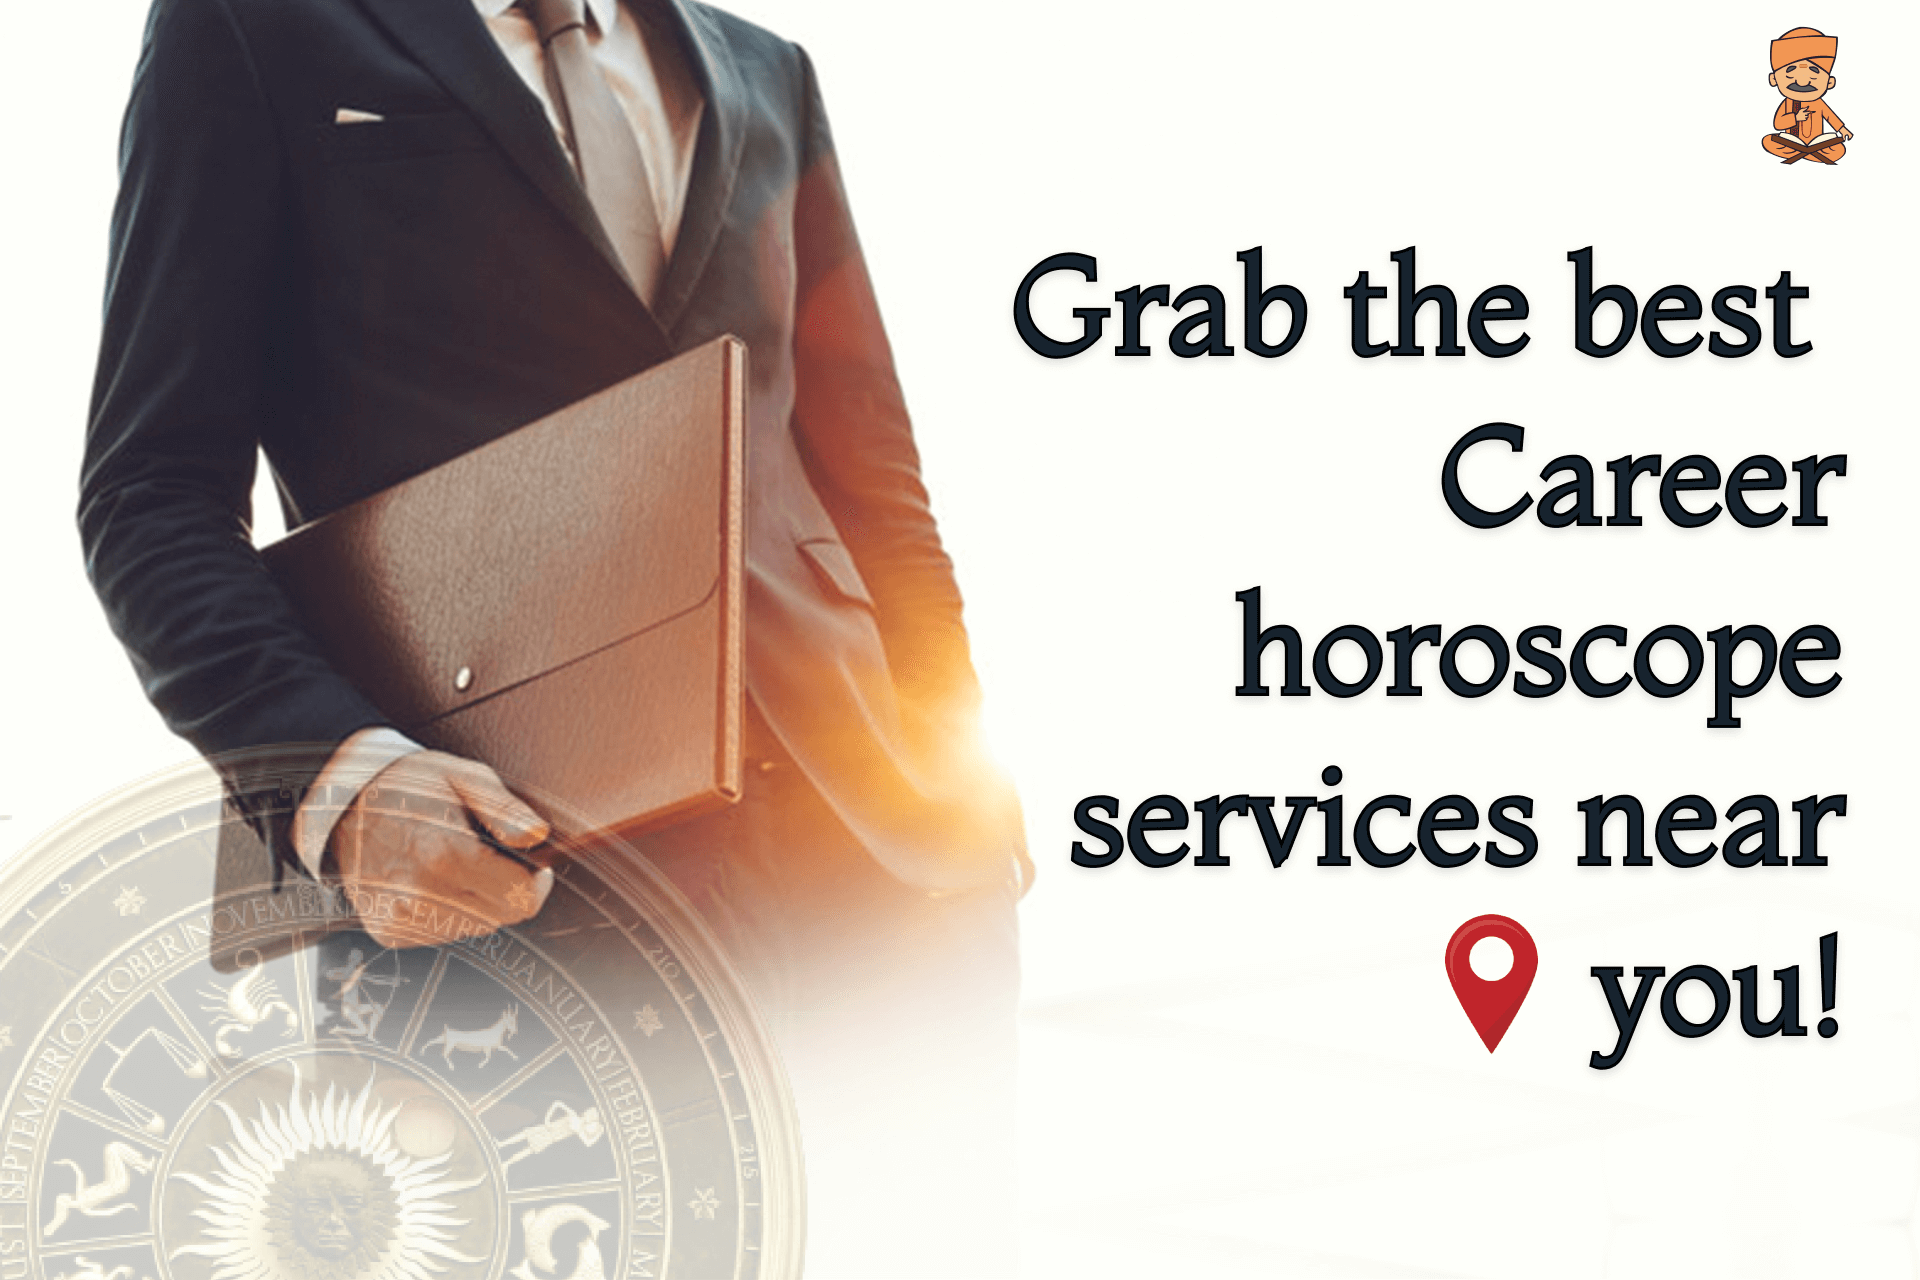 Grab the best Career horoscope services near you!